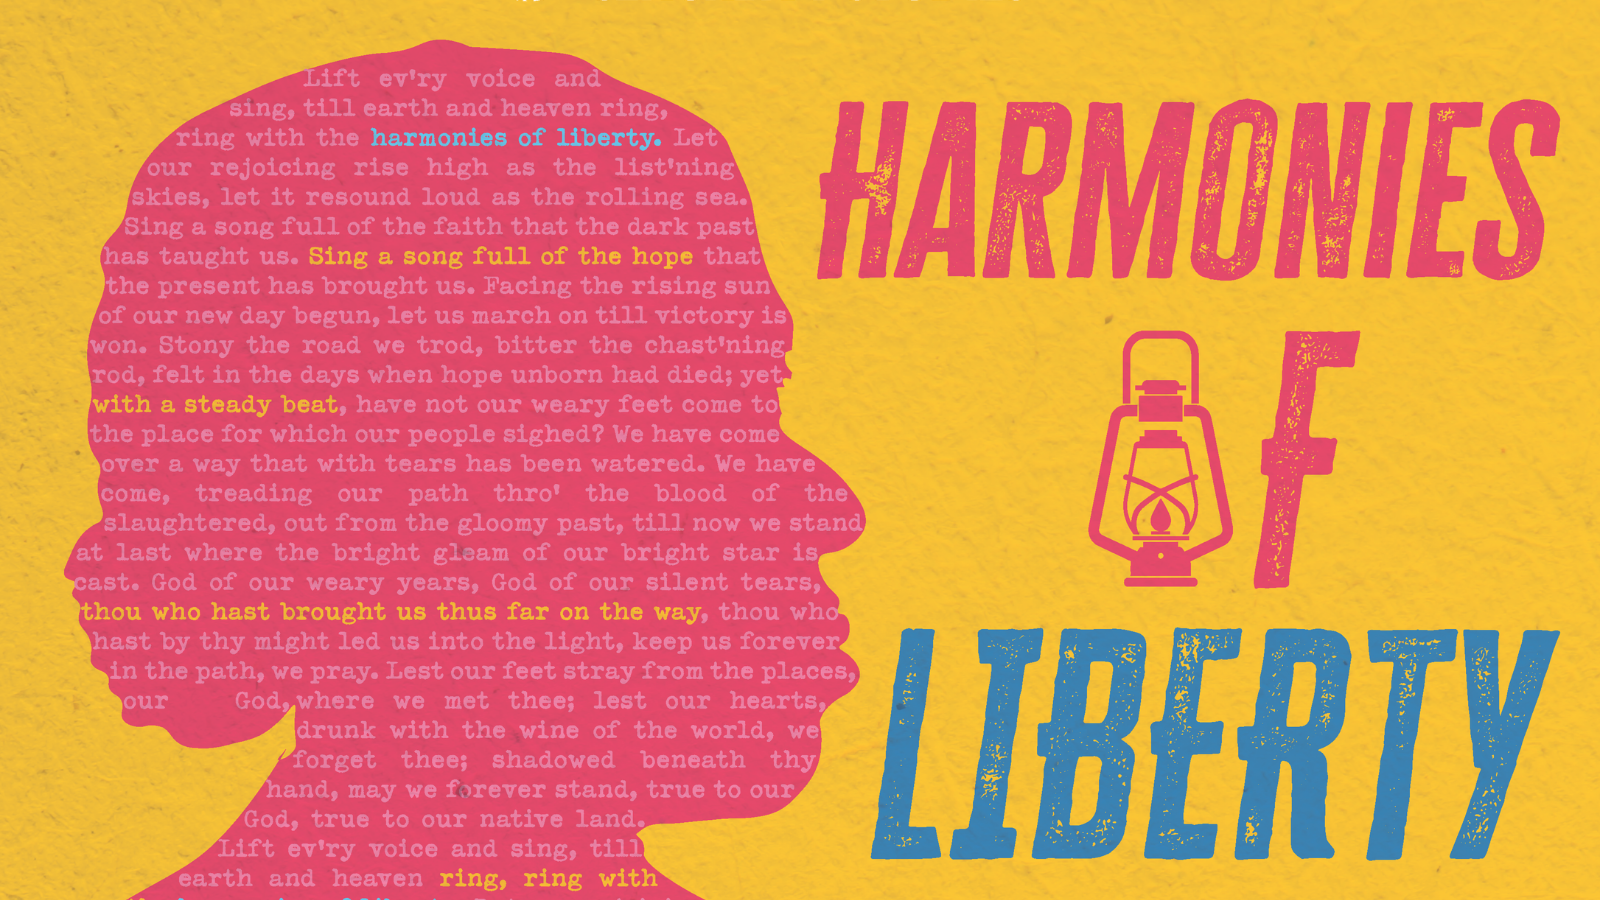 A pink silhouette of Harriet Tubman overlaid with the lyrics of "Lift Every Voice and Sing" besides the titles Harmonies of Liberty. The O in liberty is a lantern motif.